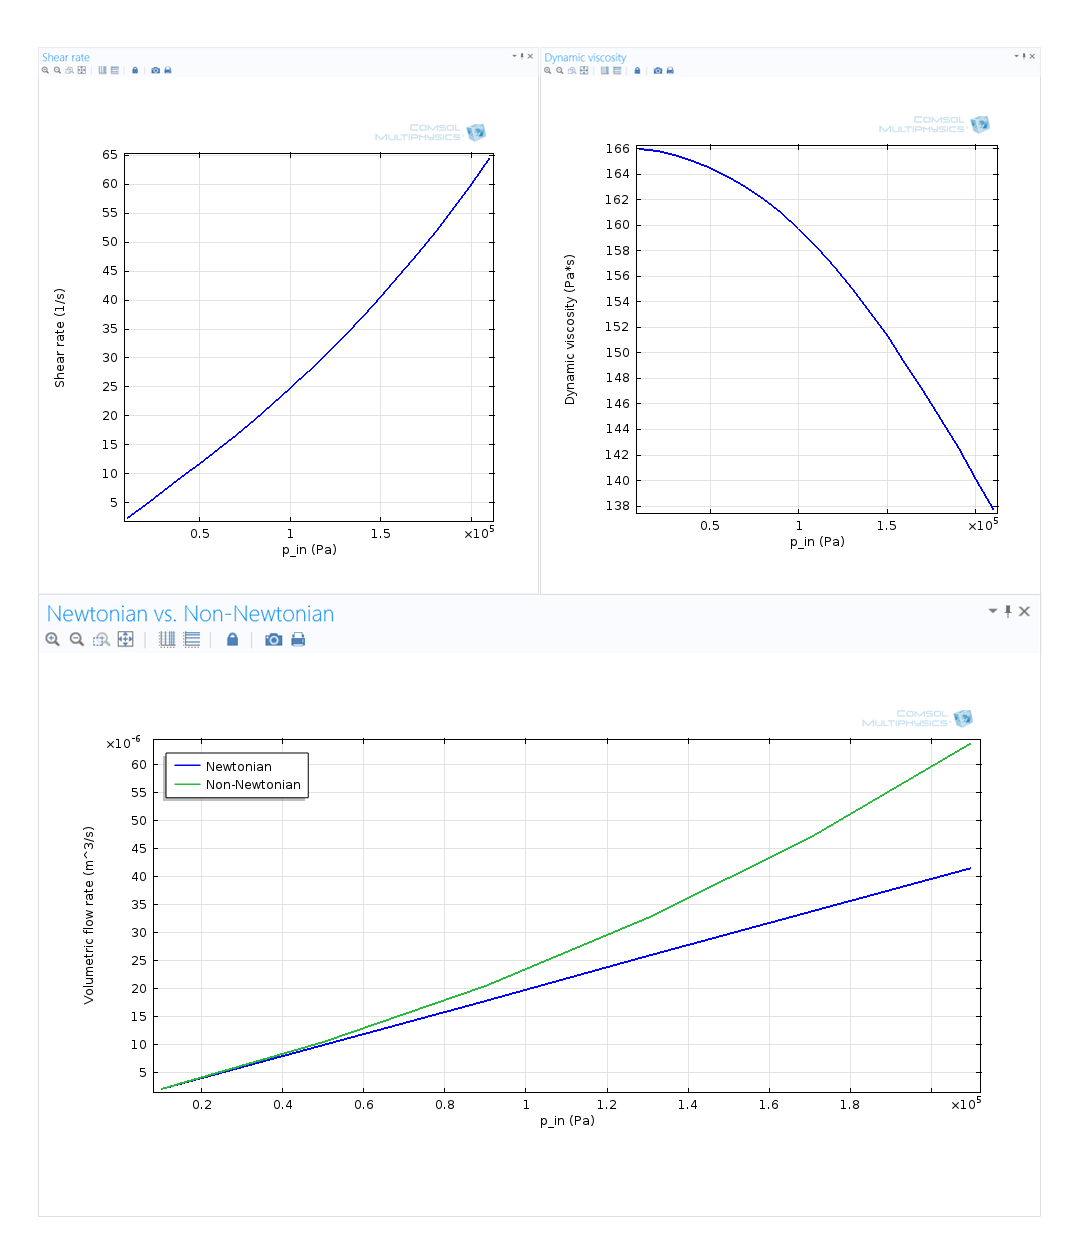 Non-Newtonian Flow: The shear rate, dynamic viscosity and volumetric flow of a polystyrene solution and the volumetric flow for an equivalent Newtonian fluid, all as a function of pressure.